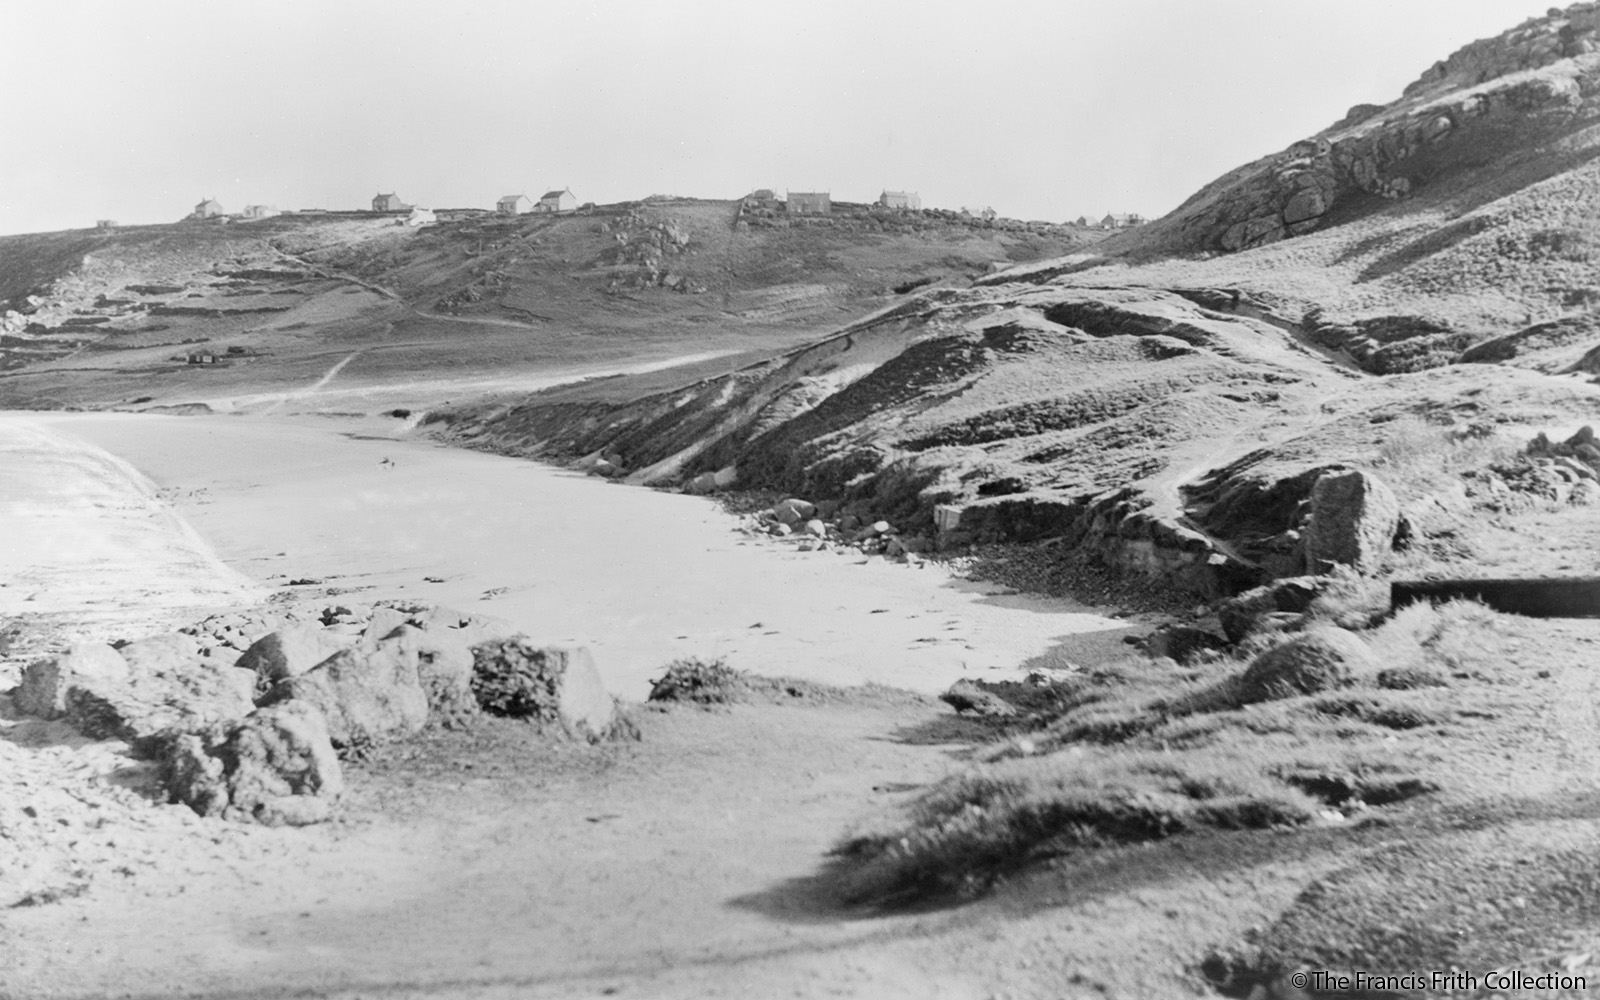 Sennen Cove, c1955. Image courtesy of the Francis Frith collection.